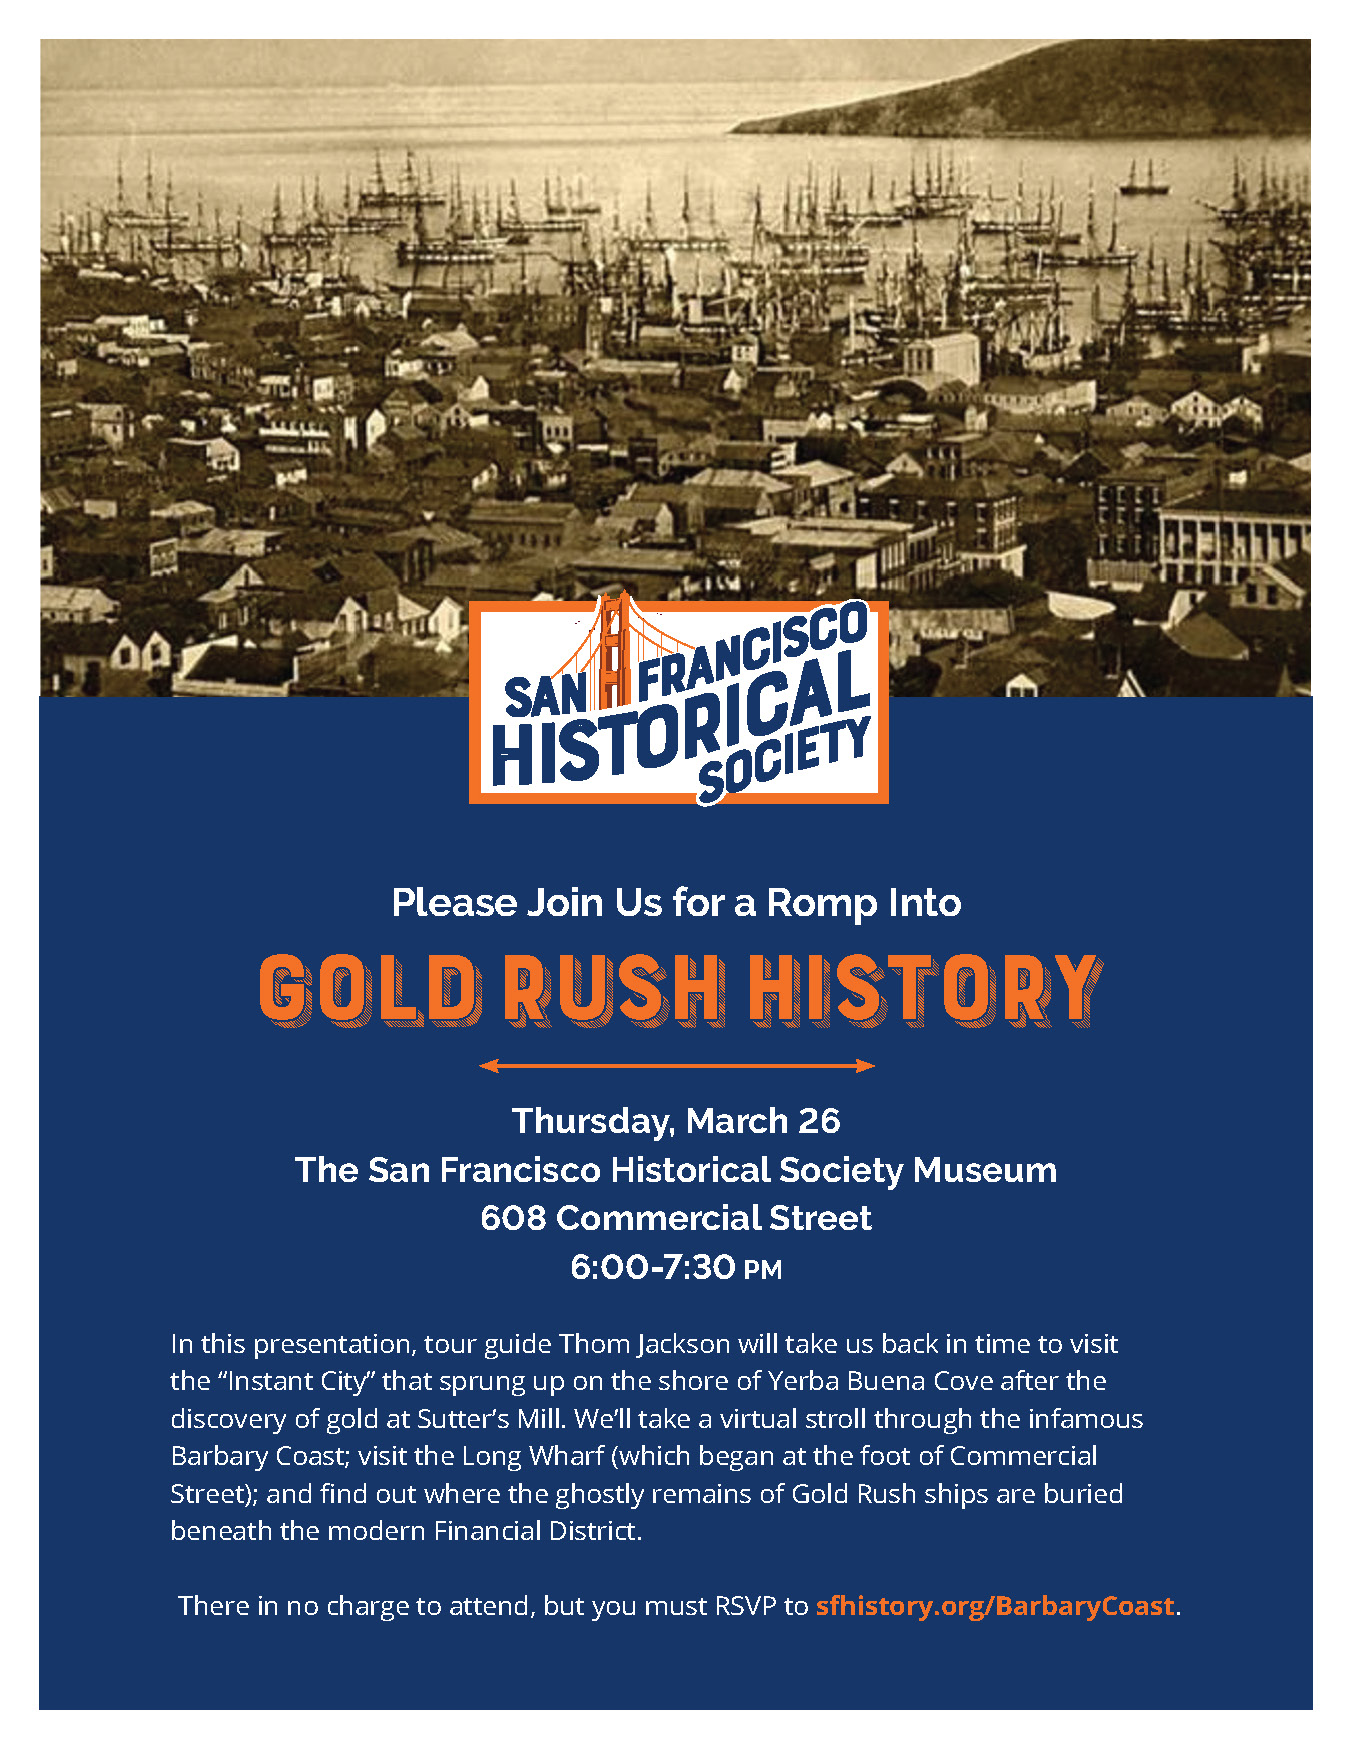 Gold Rush history exhibit signage and collateral